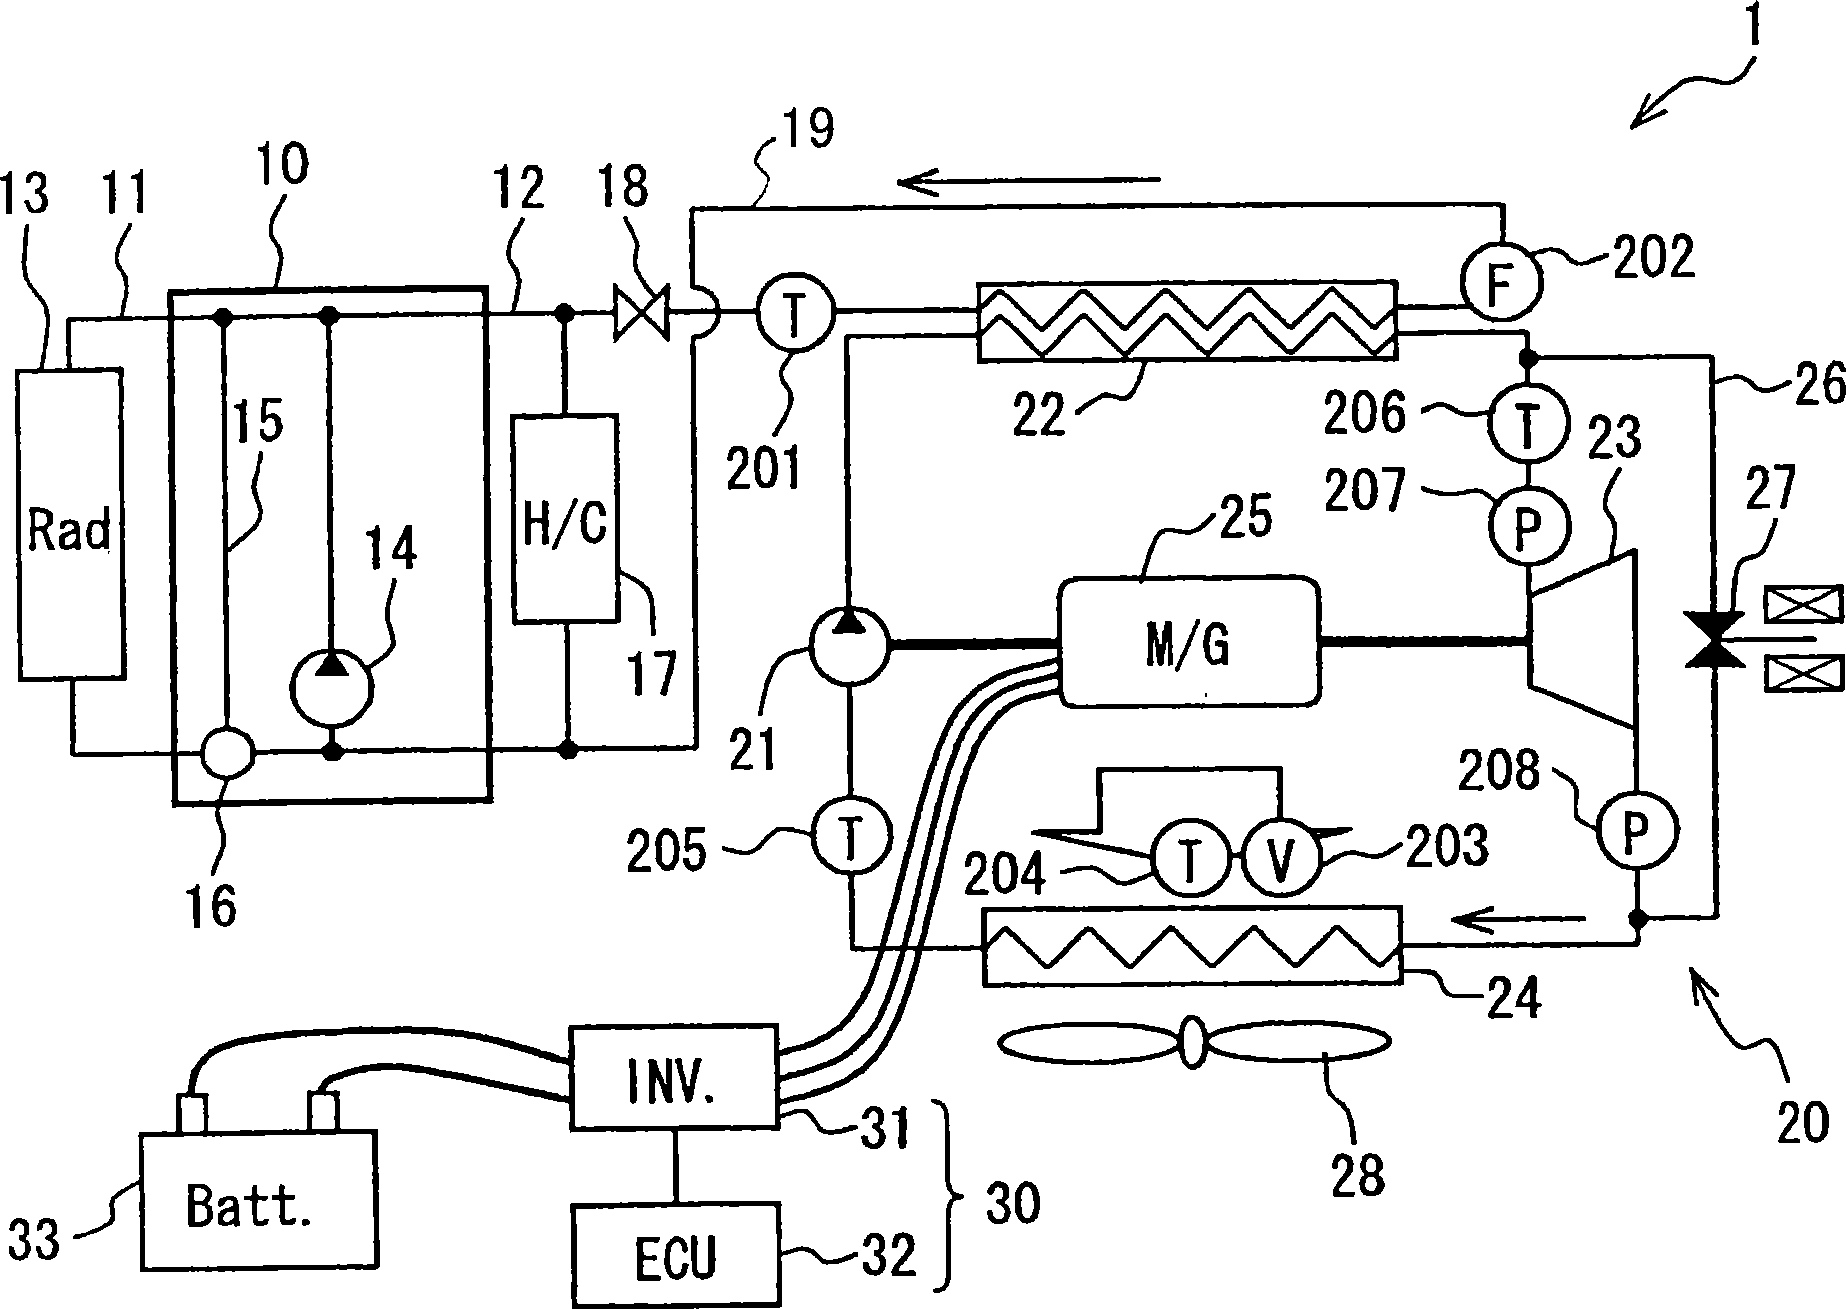 Waste heat recovery apparatus